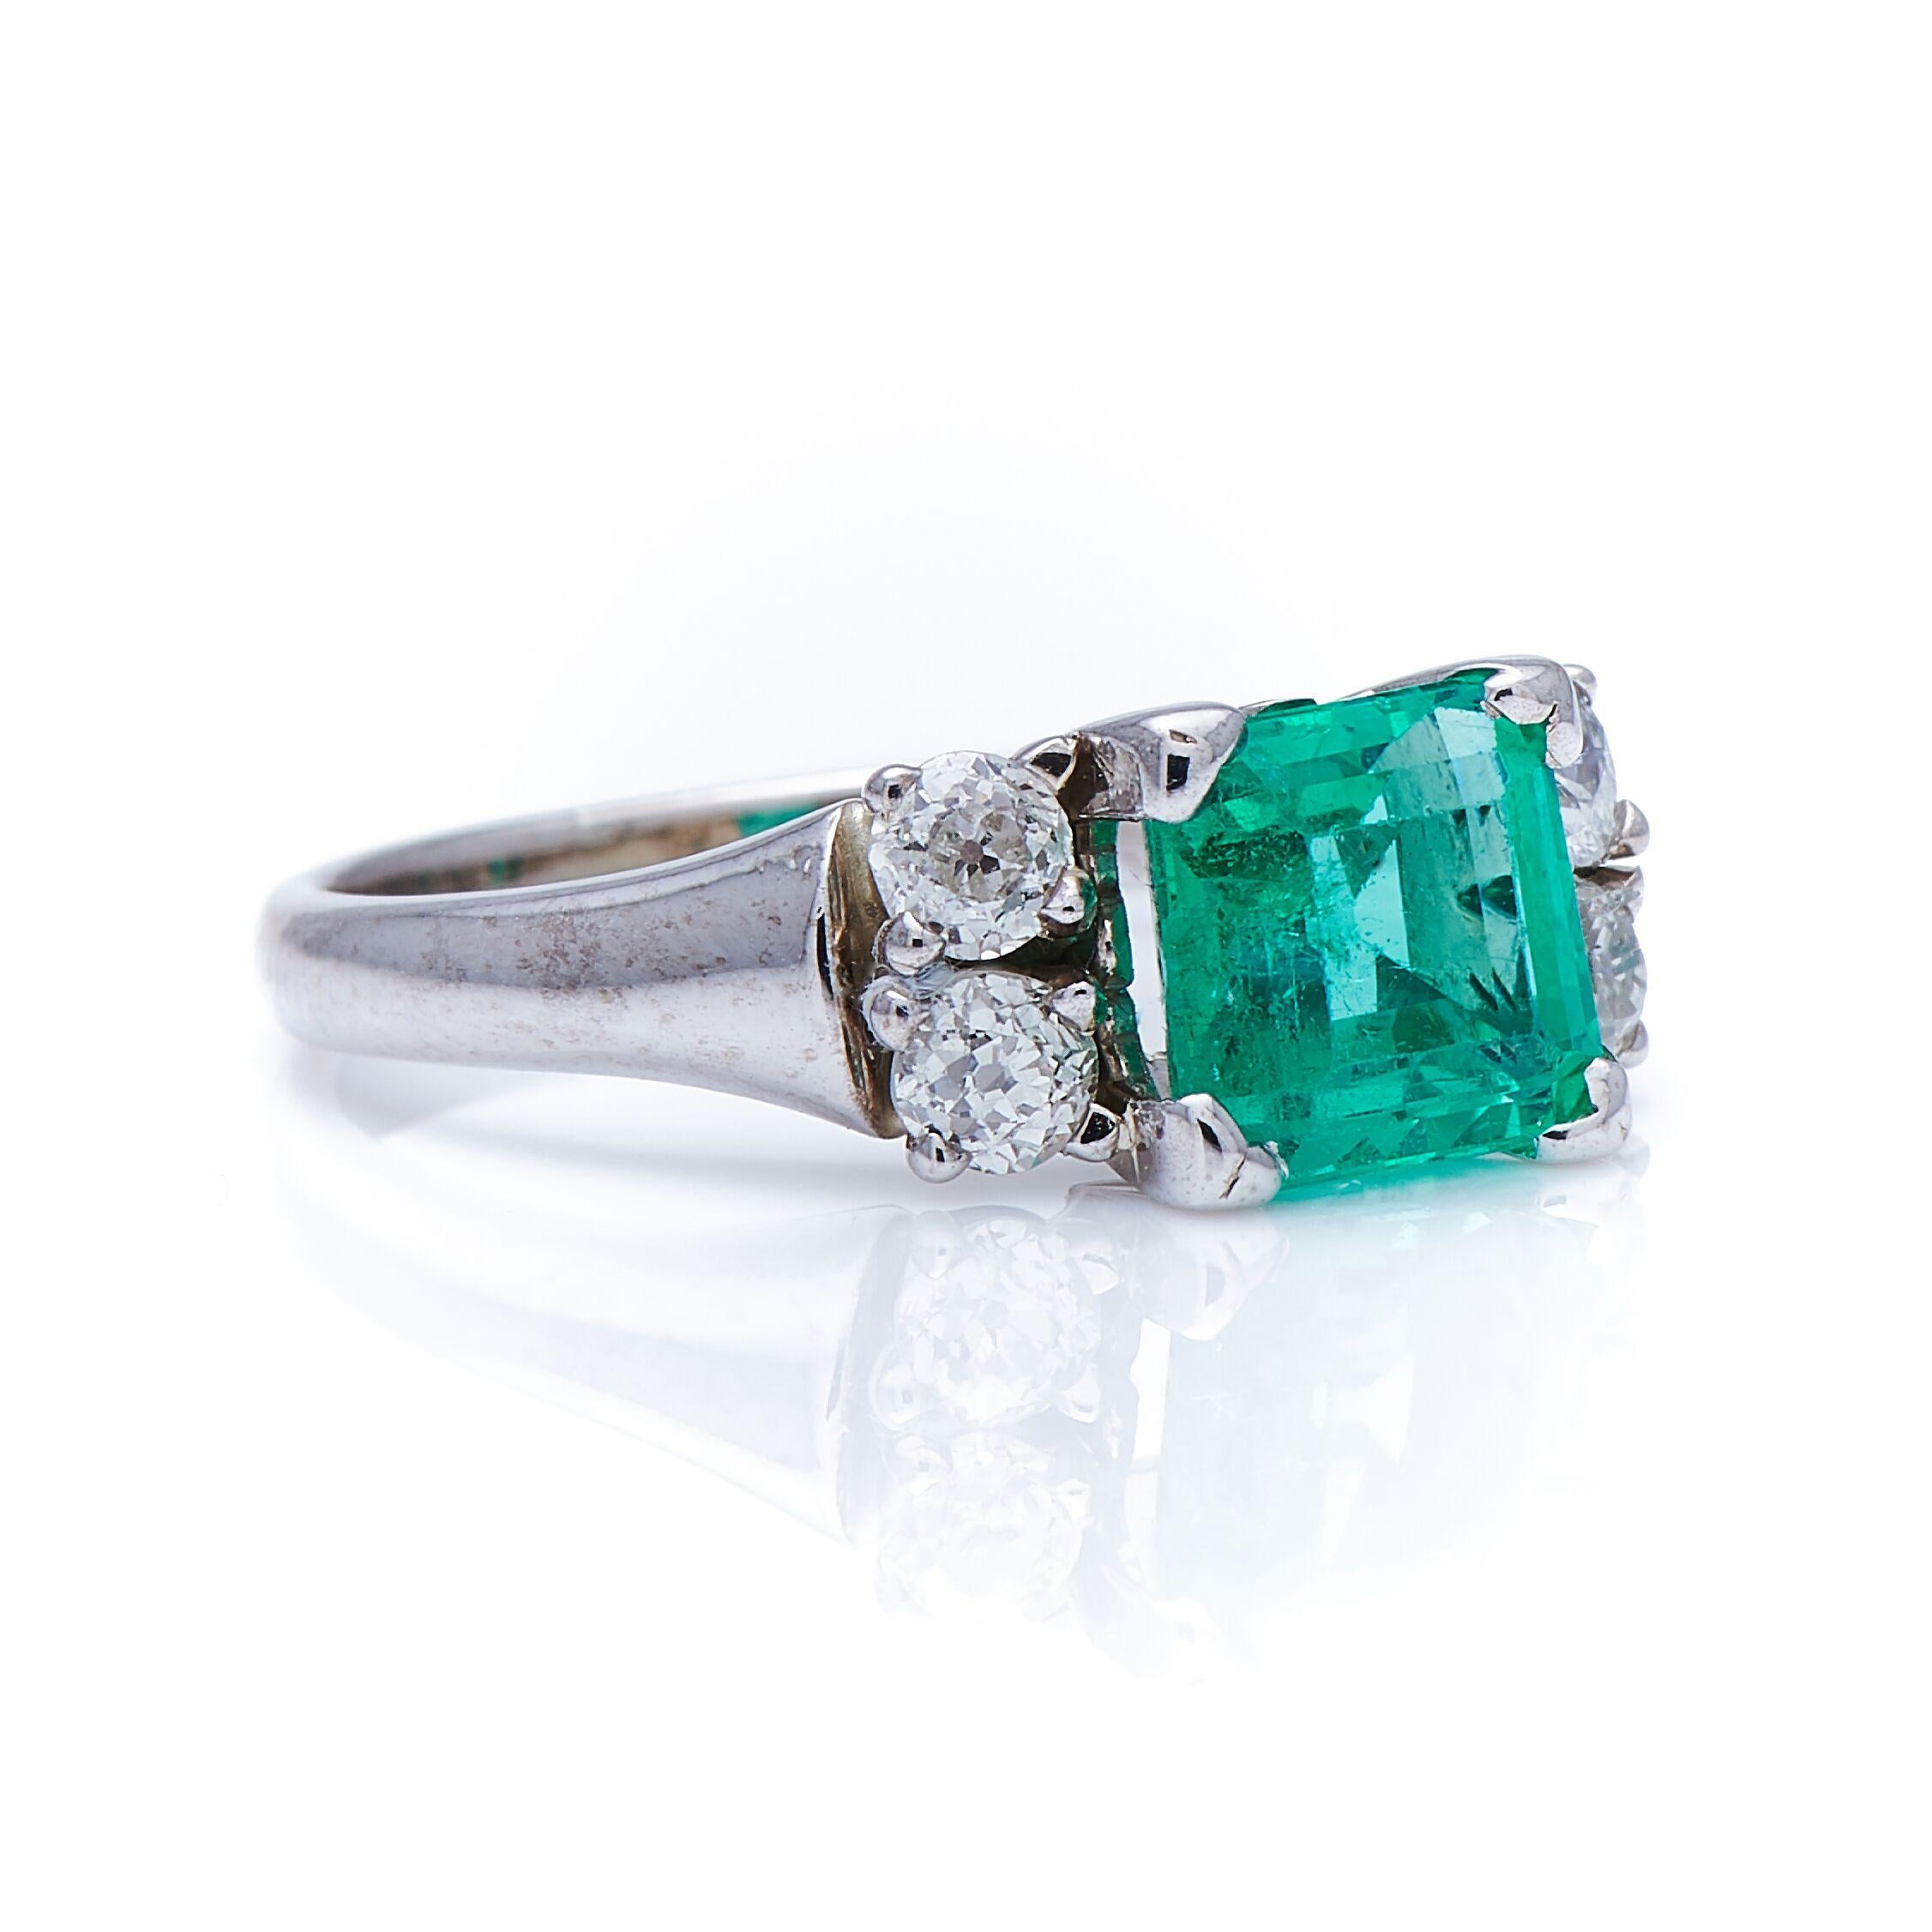 Emerald and diamond ring, mid 20th century. This ring is set with an unusually clean Colombian emerald in a bright, fresh green colour, between shoulders set with early 20thcentury circular-cut diamonds. The claw setting is simple and effective,